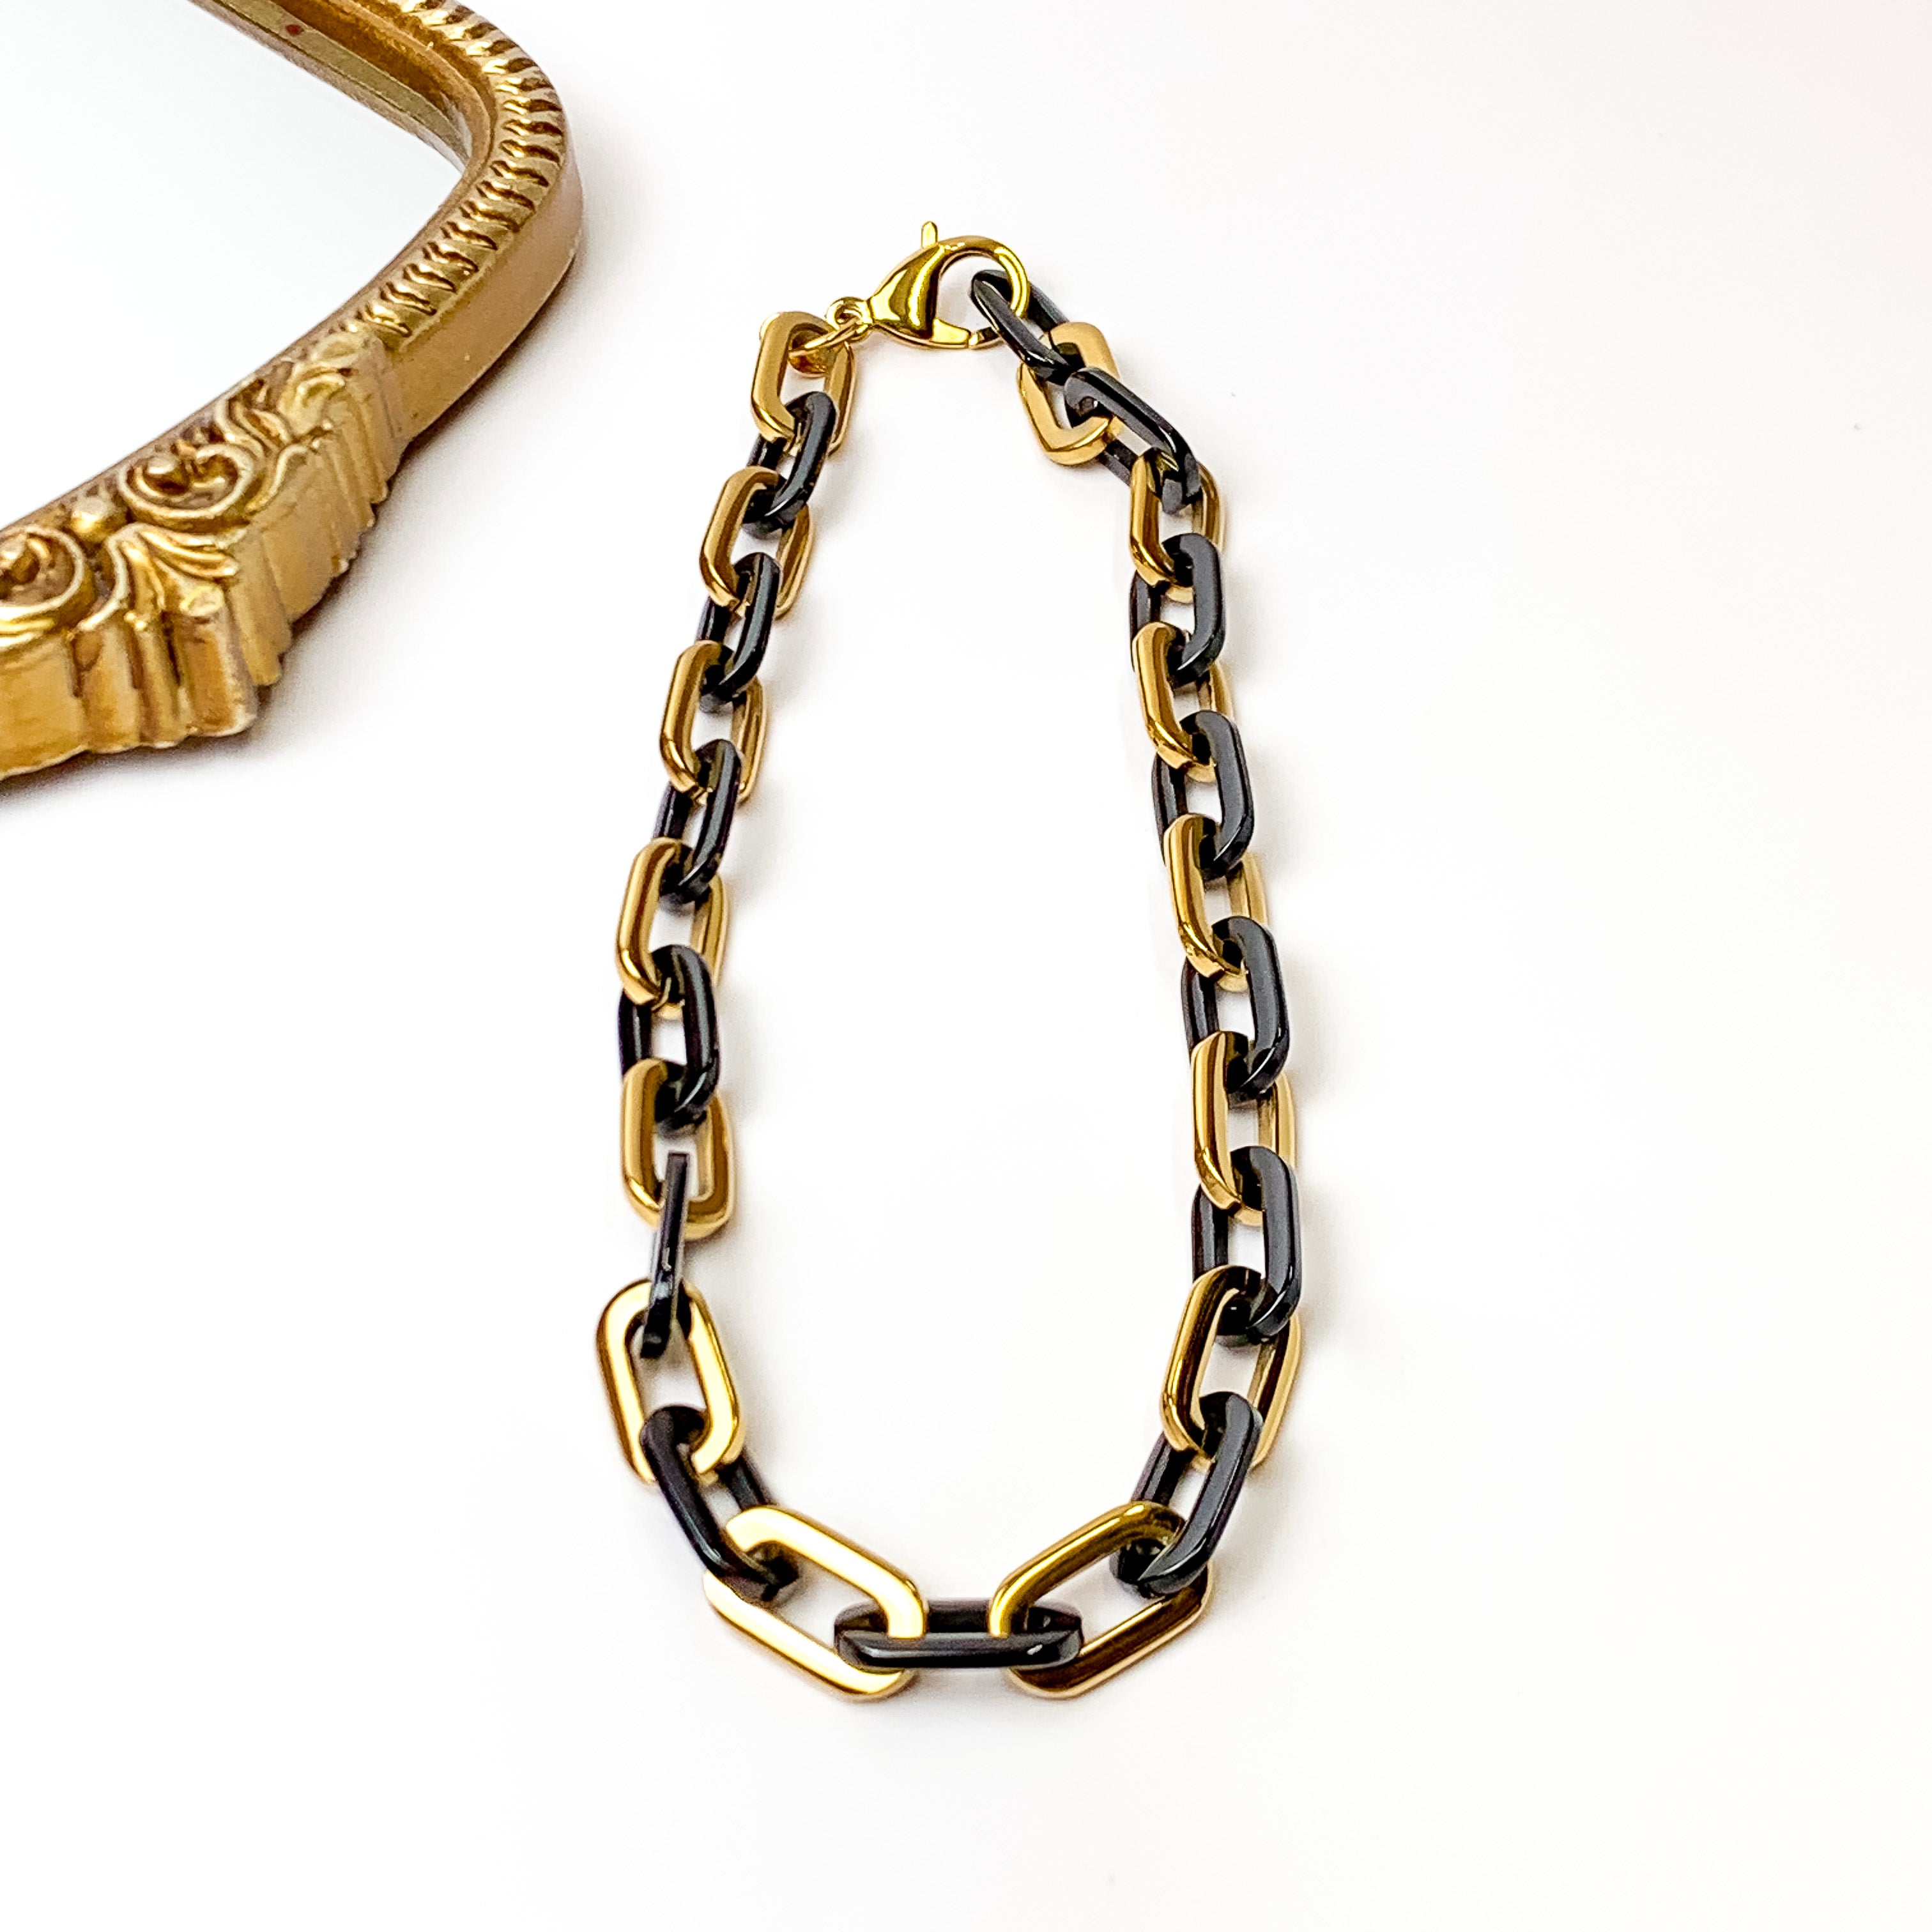 Bracha | Elle Gage Necklace in Black and Gold Tone - Giddy Up Glamour Boutique